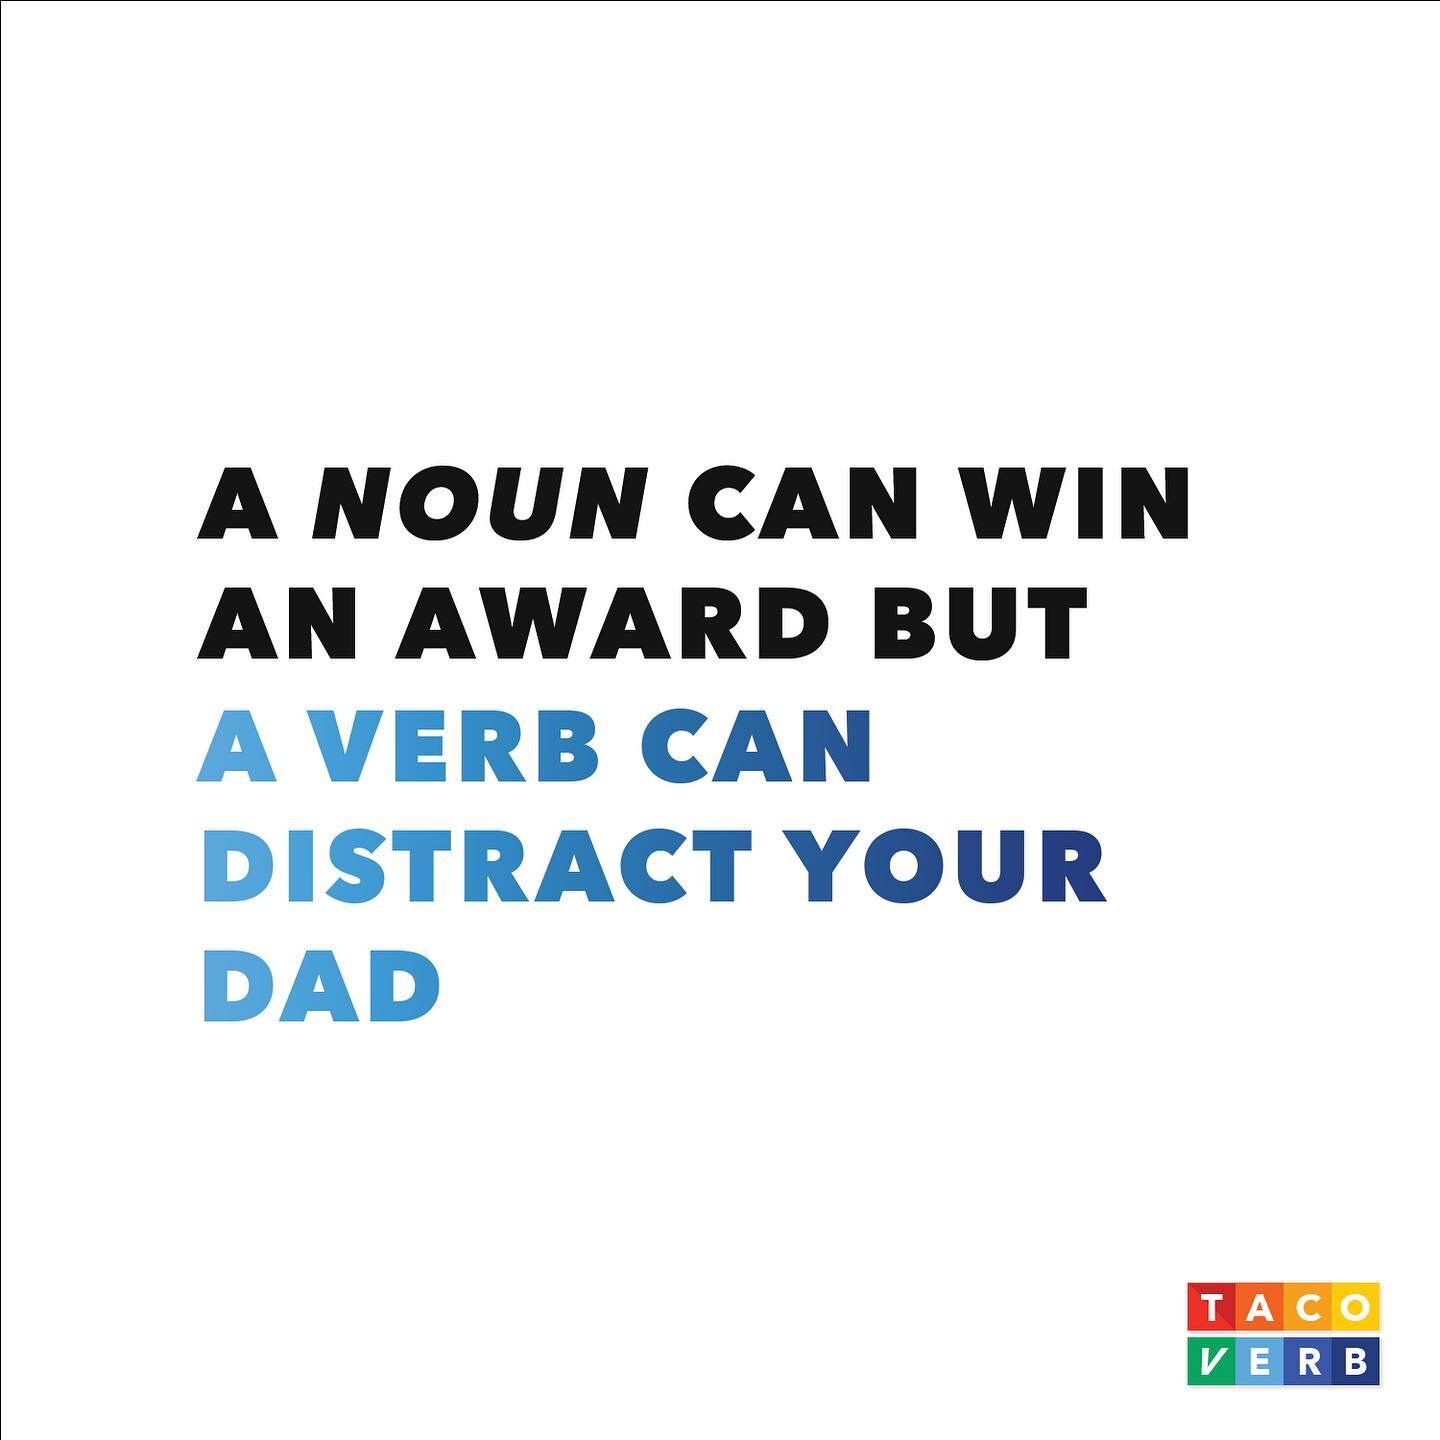 &ldquo;A Verb Can Distract Your Dad&rdquo; &hellip; And that&rsquo;s exactly what it&rsquo;s gonna do. This project has very unique utility and you should keep your eyes on the verbs! 
-
#tacoverb #nounvsverb #distracted #nft #utility #comingsoon #ta